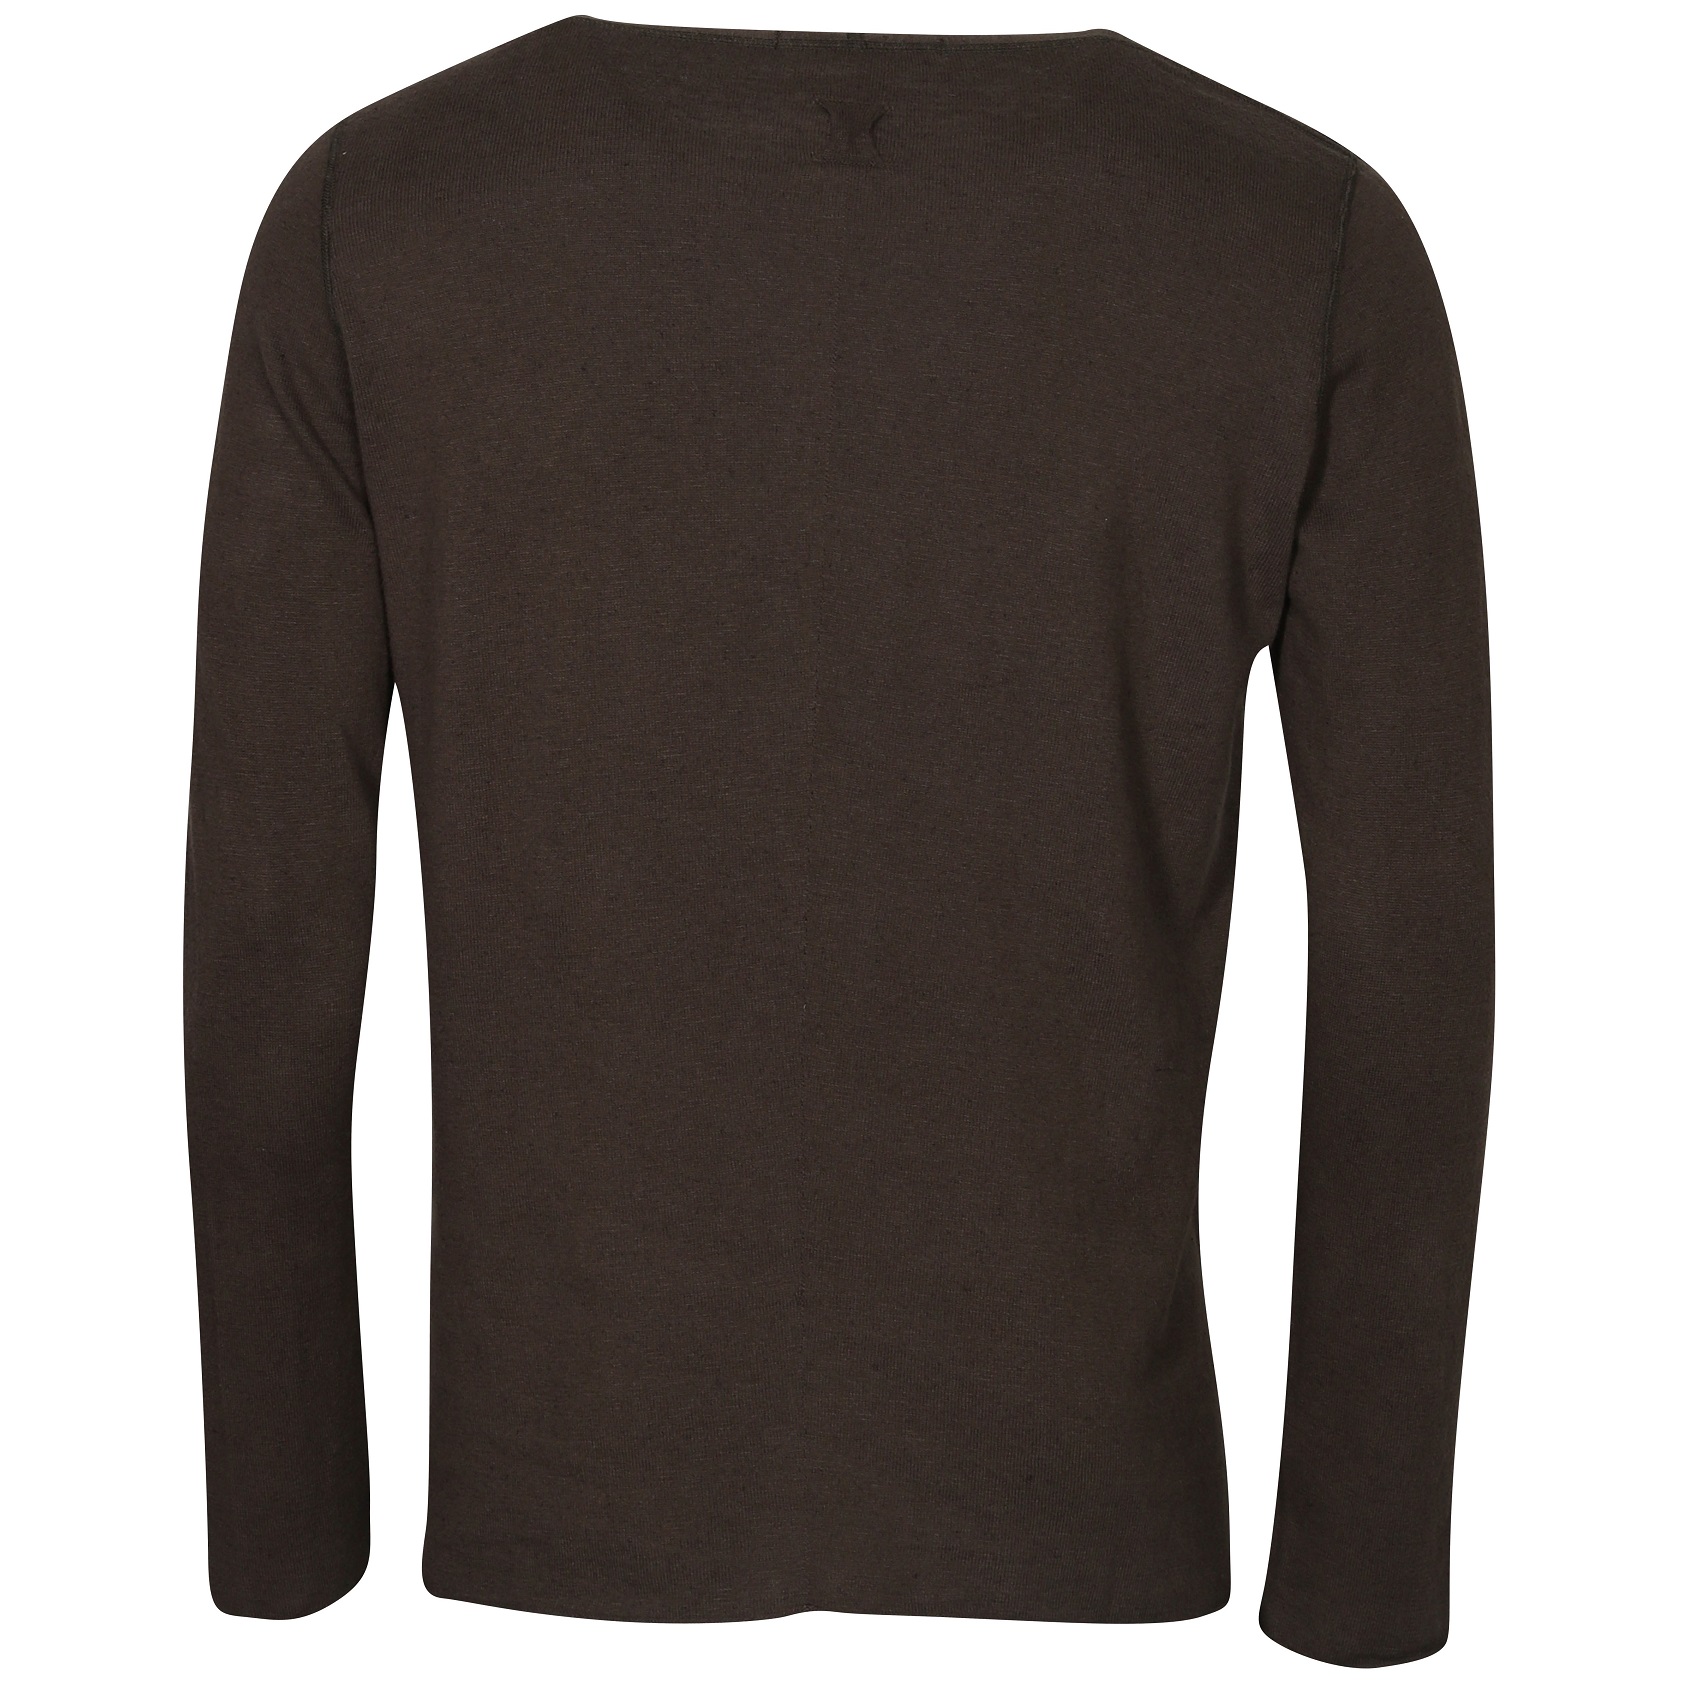 HANNES ROETHER Knit Sweater in Brown